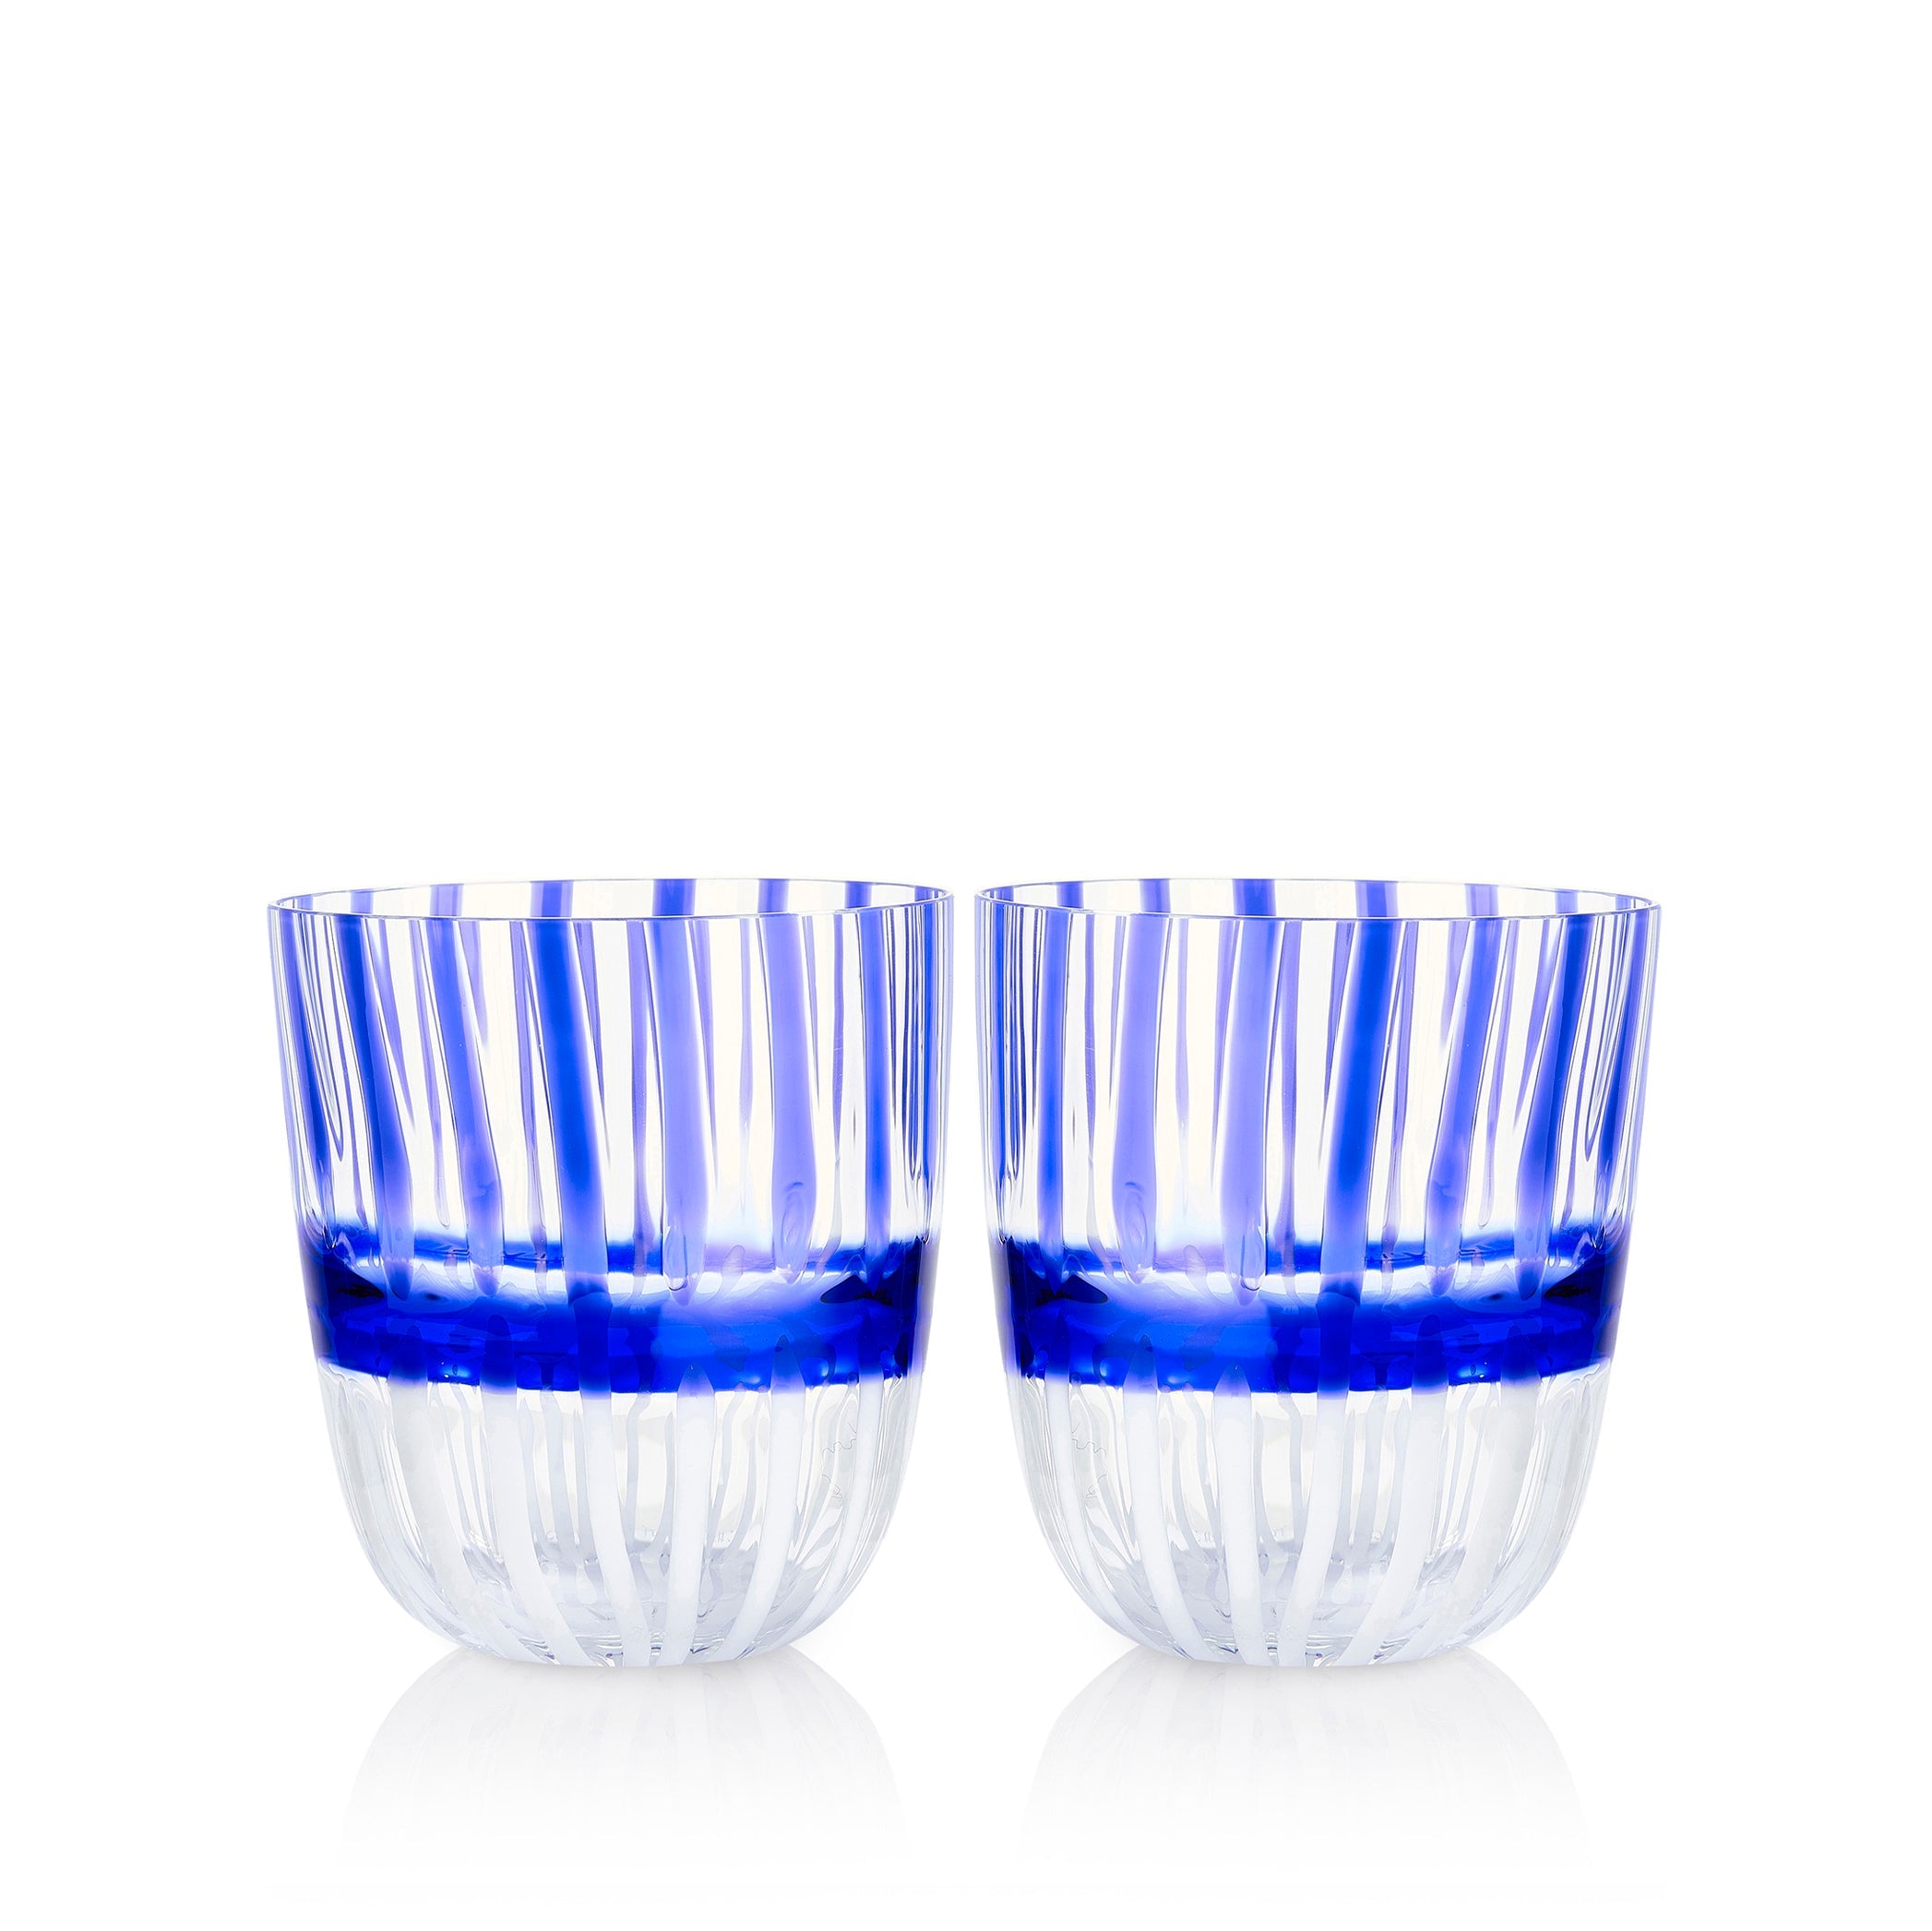 Set of Two Handblown Double Stripe Glass Tumblers in Midnight Blue & White, 8.5cm